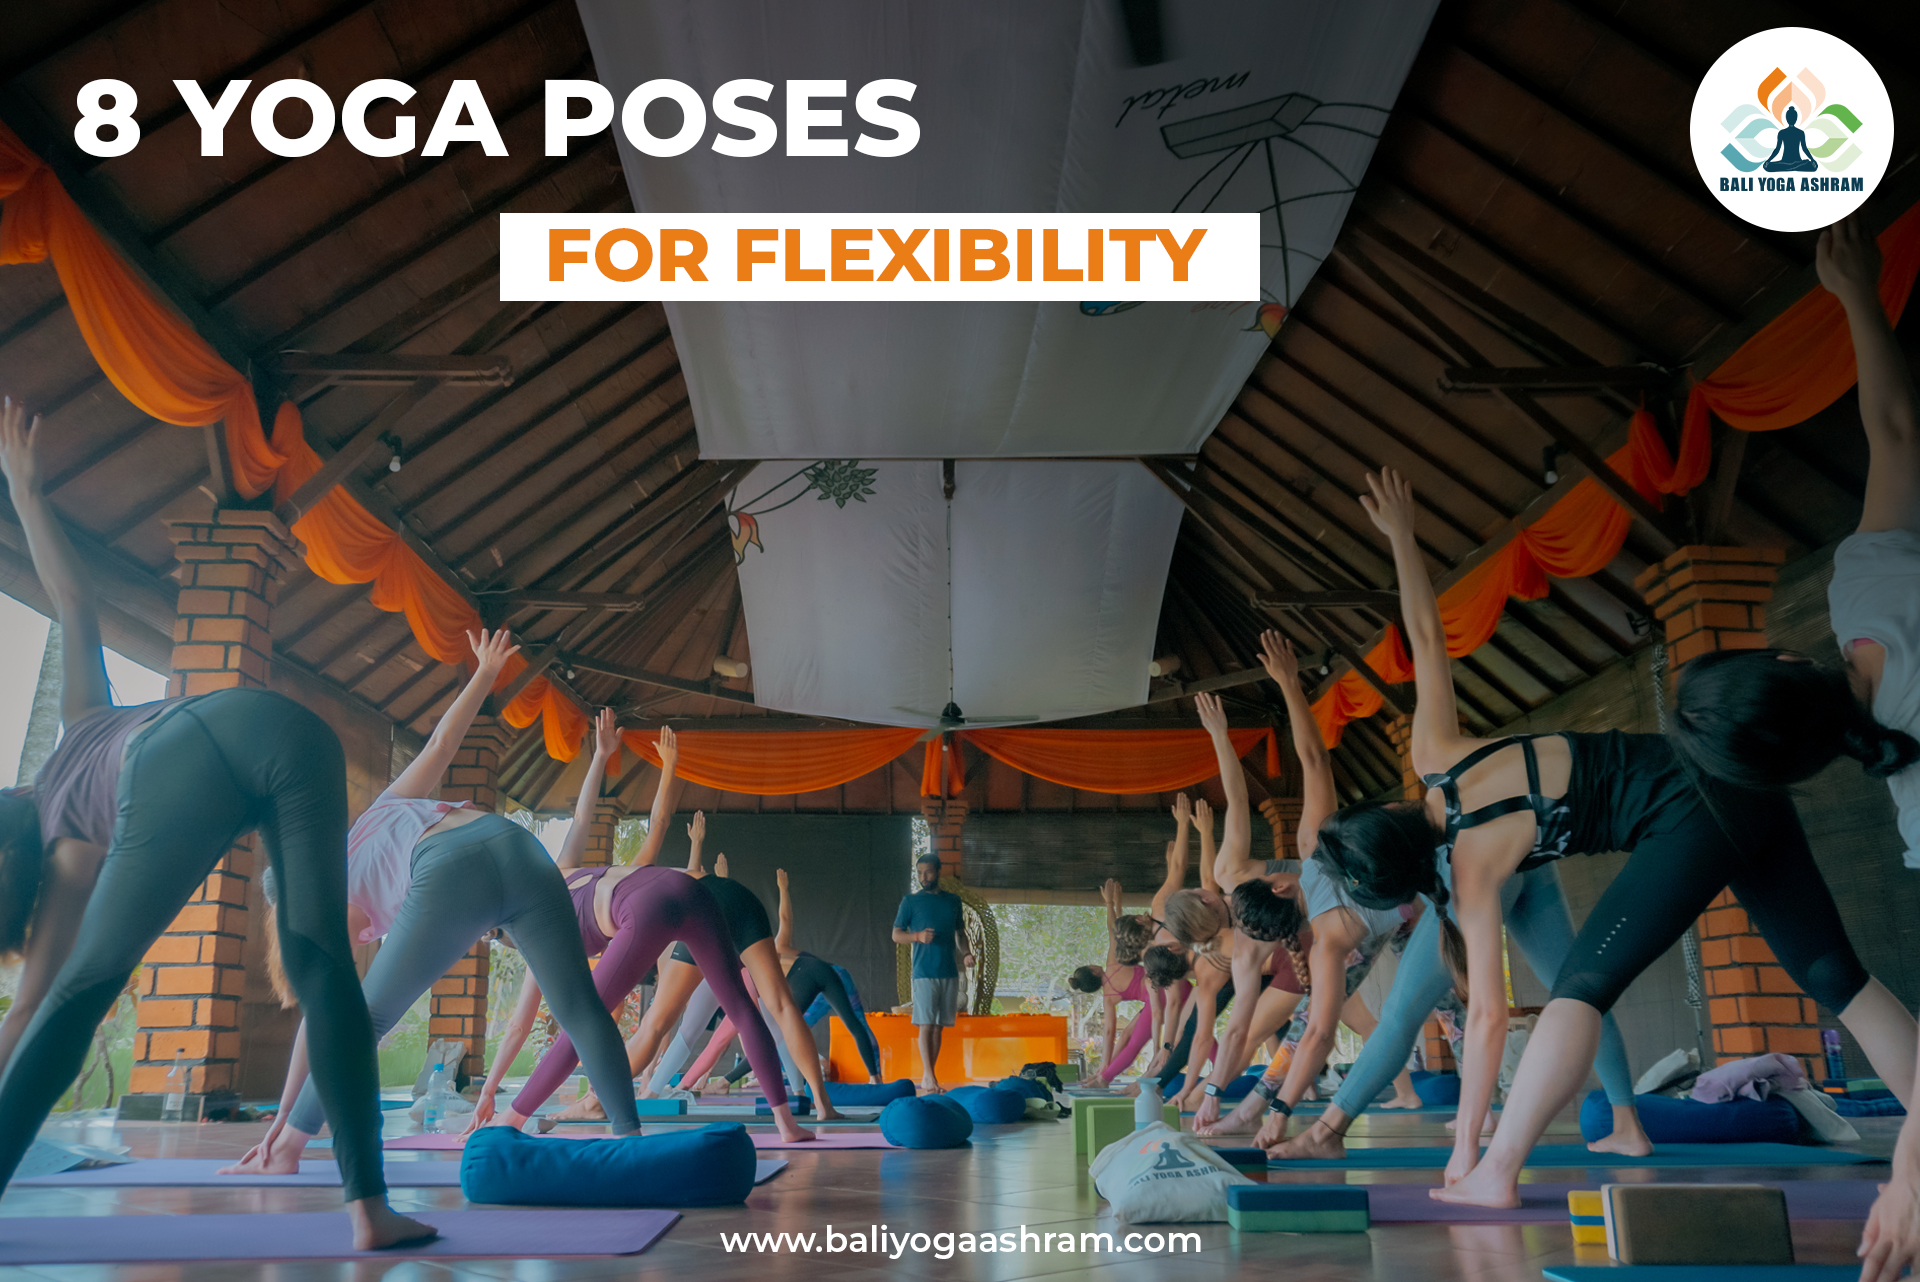 8 Yoga Poses for Flexibility: A Step by Step Guide